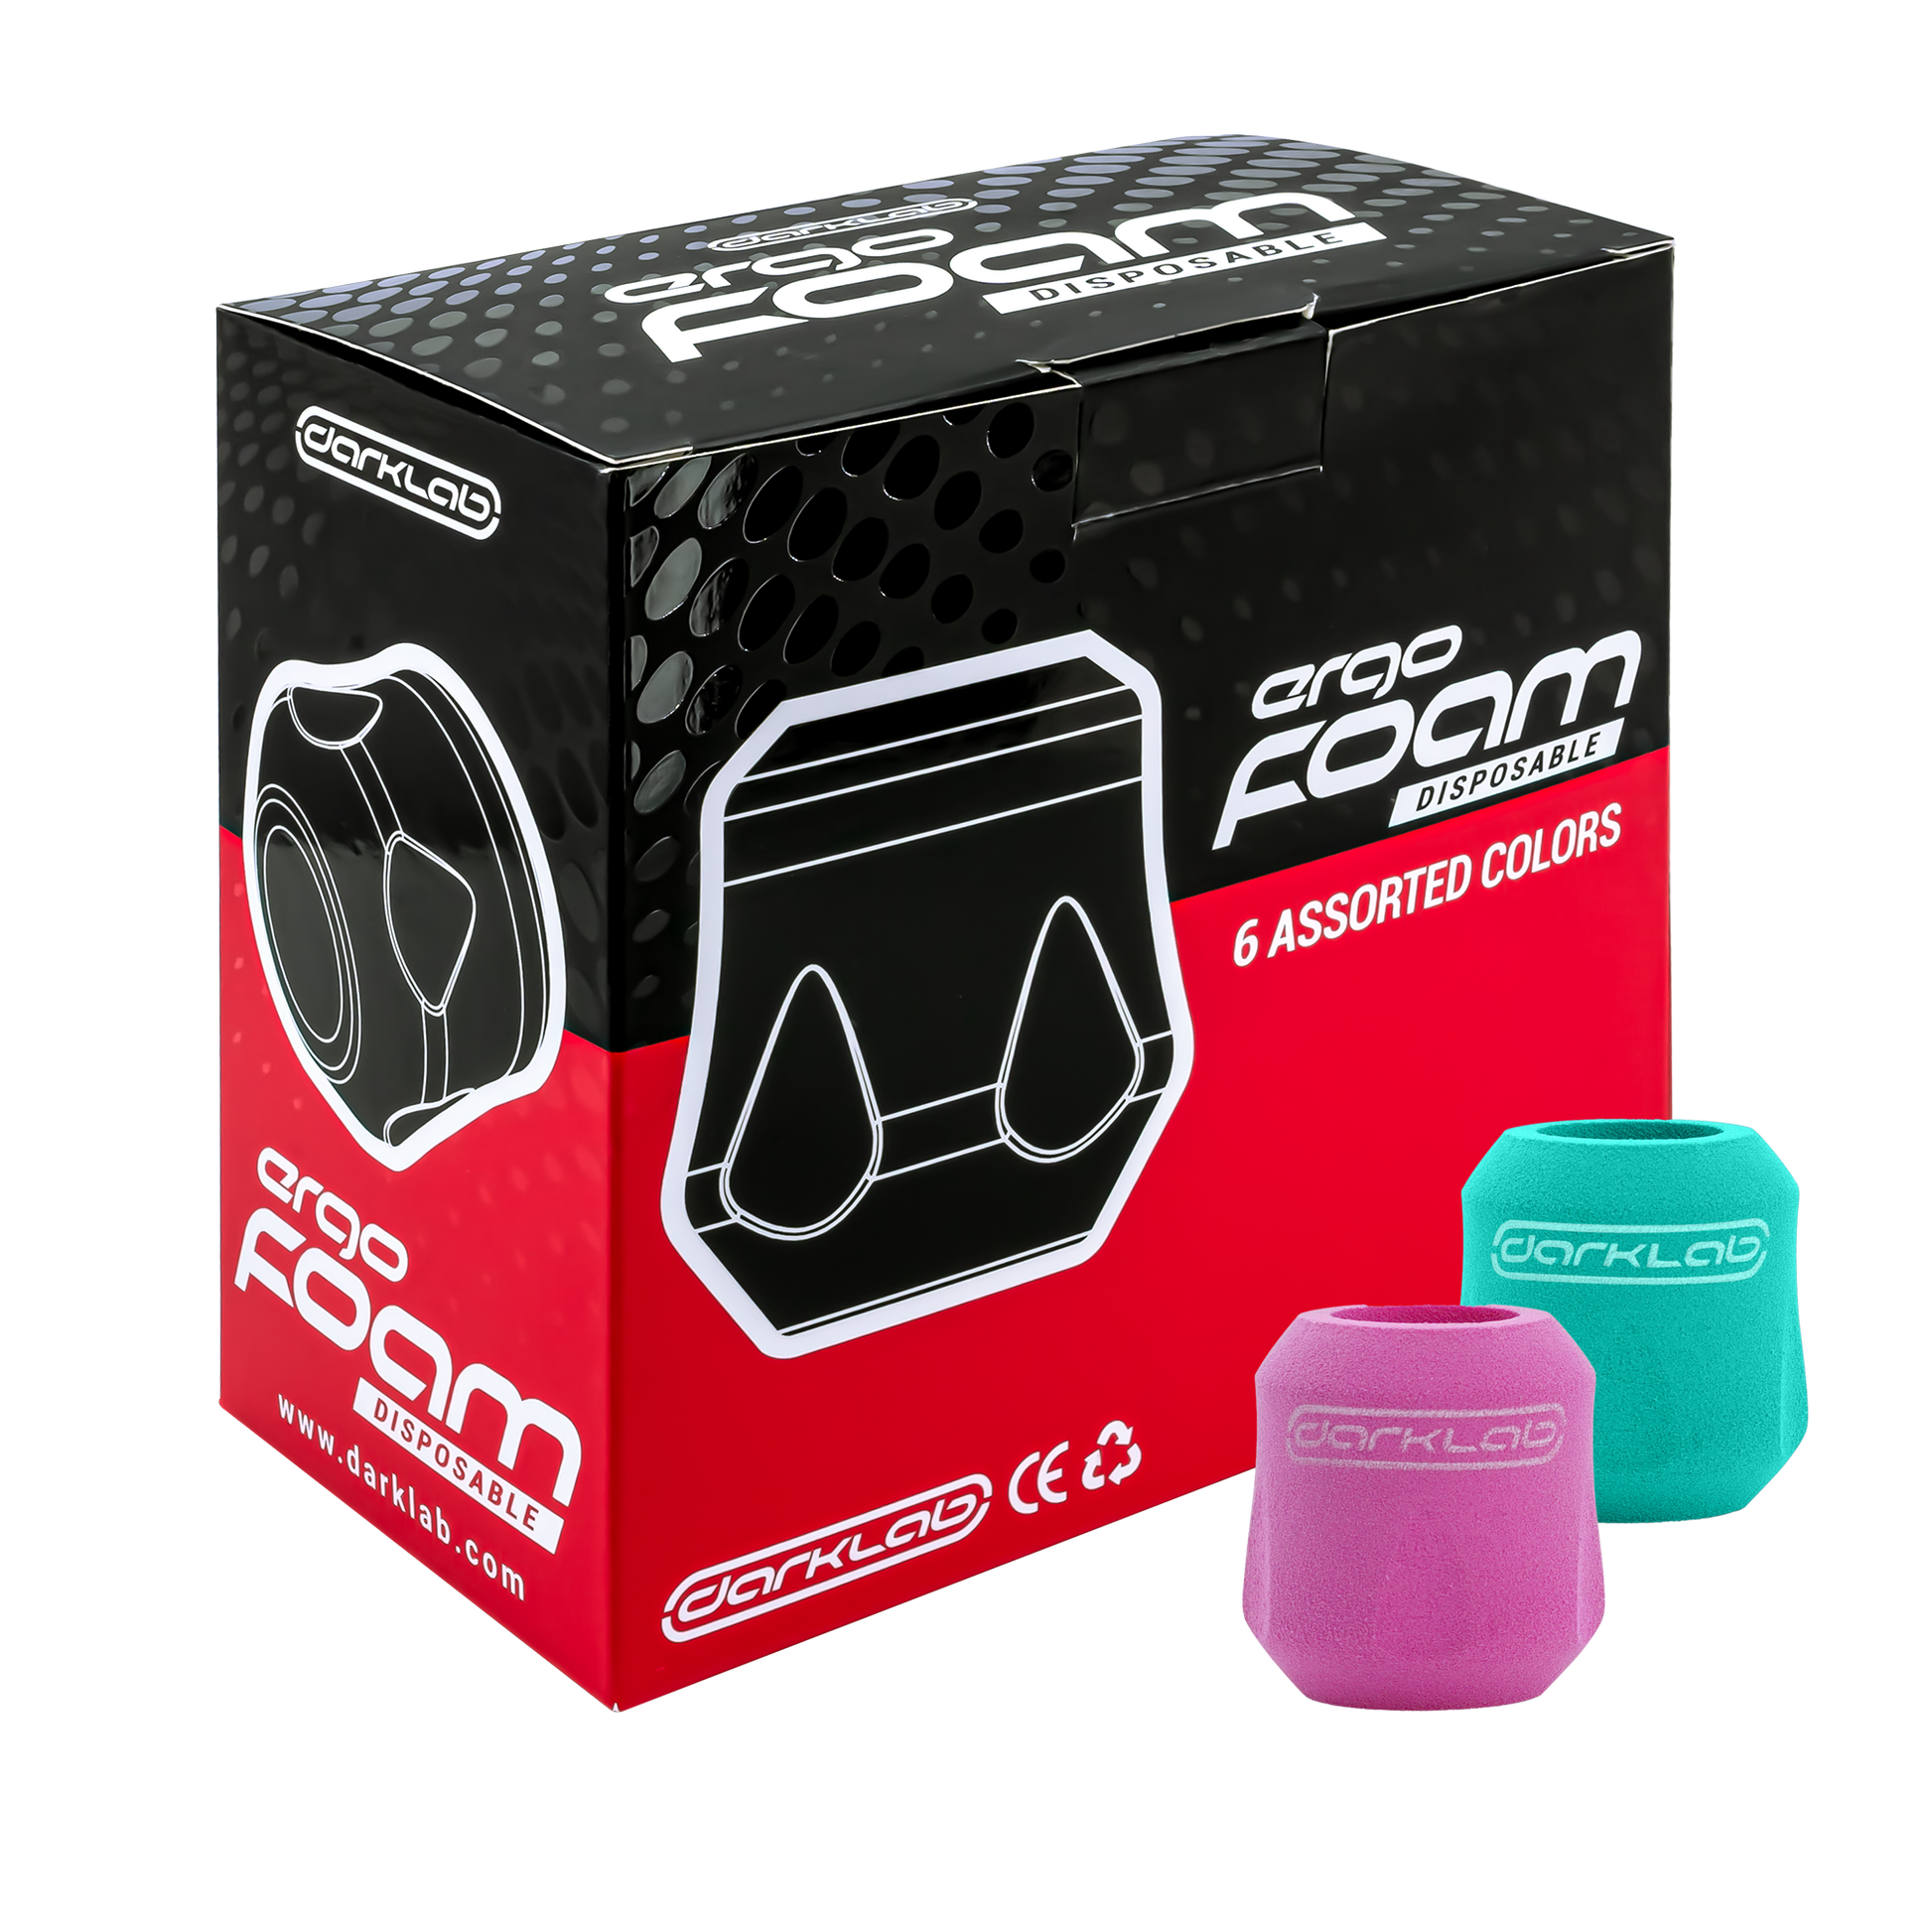 Ergo Disposable Foam Covers - Box of 24